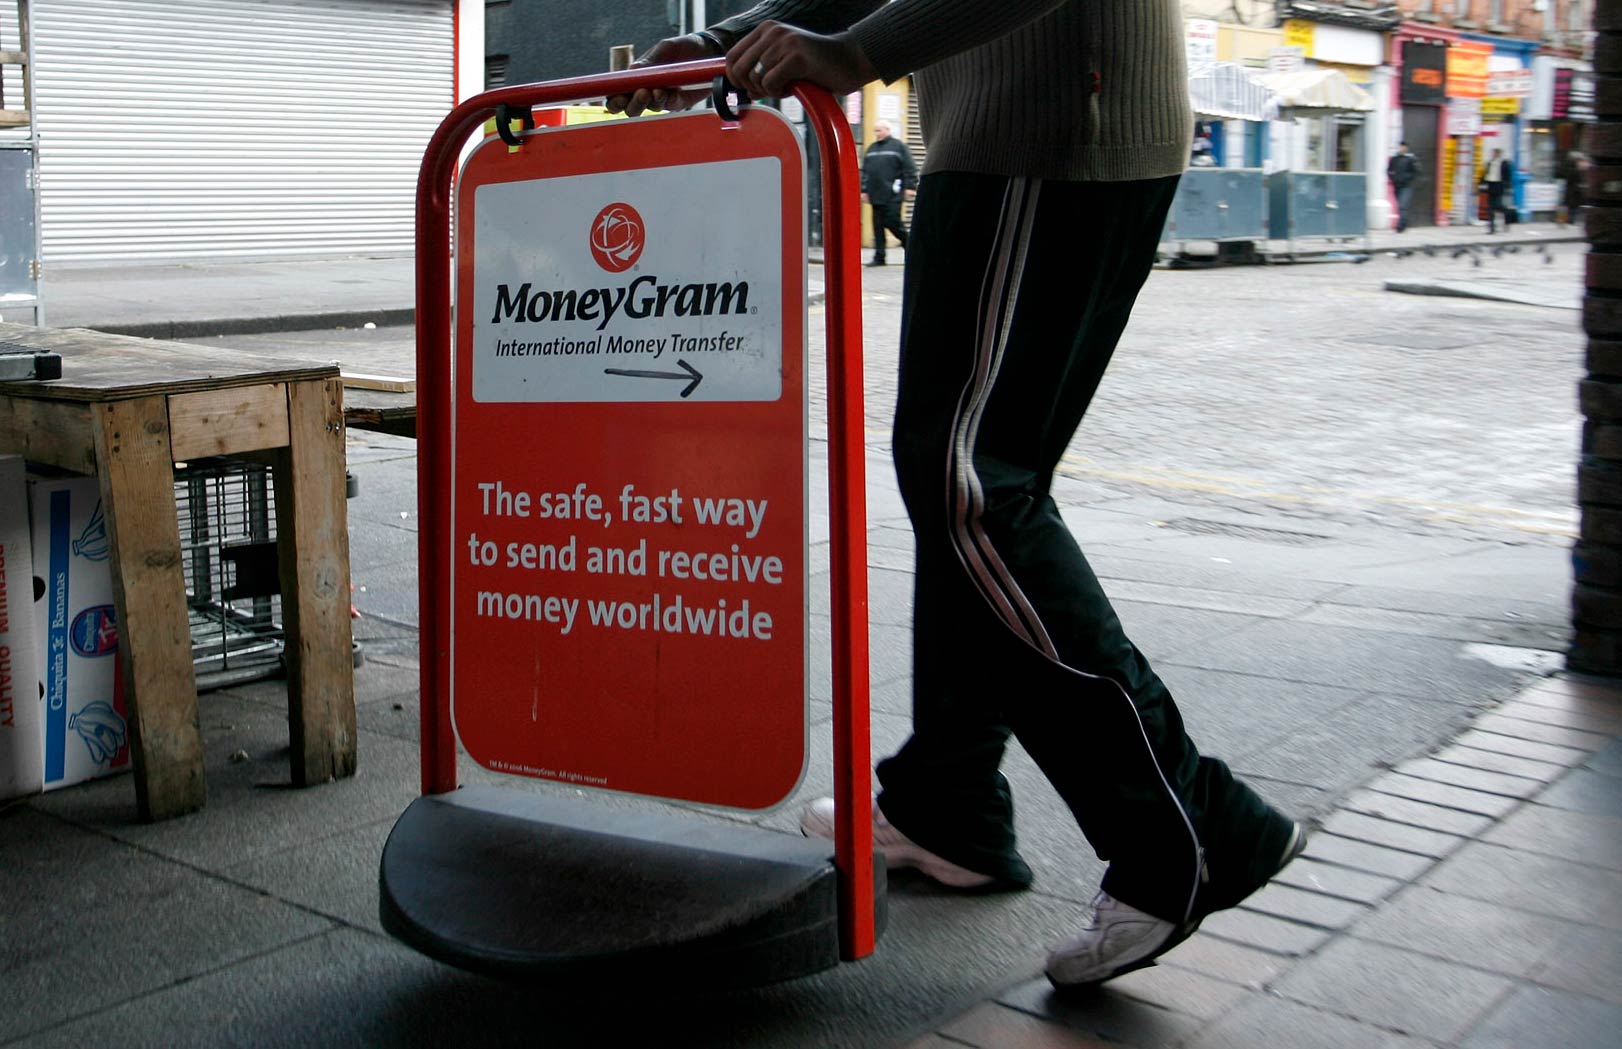 A shop worker places a sign for 'MoneyGram' outside his store on Moore Street in Dublin, Ireland.
